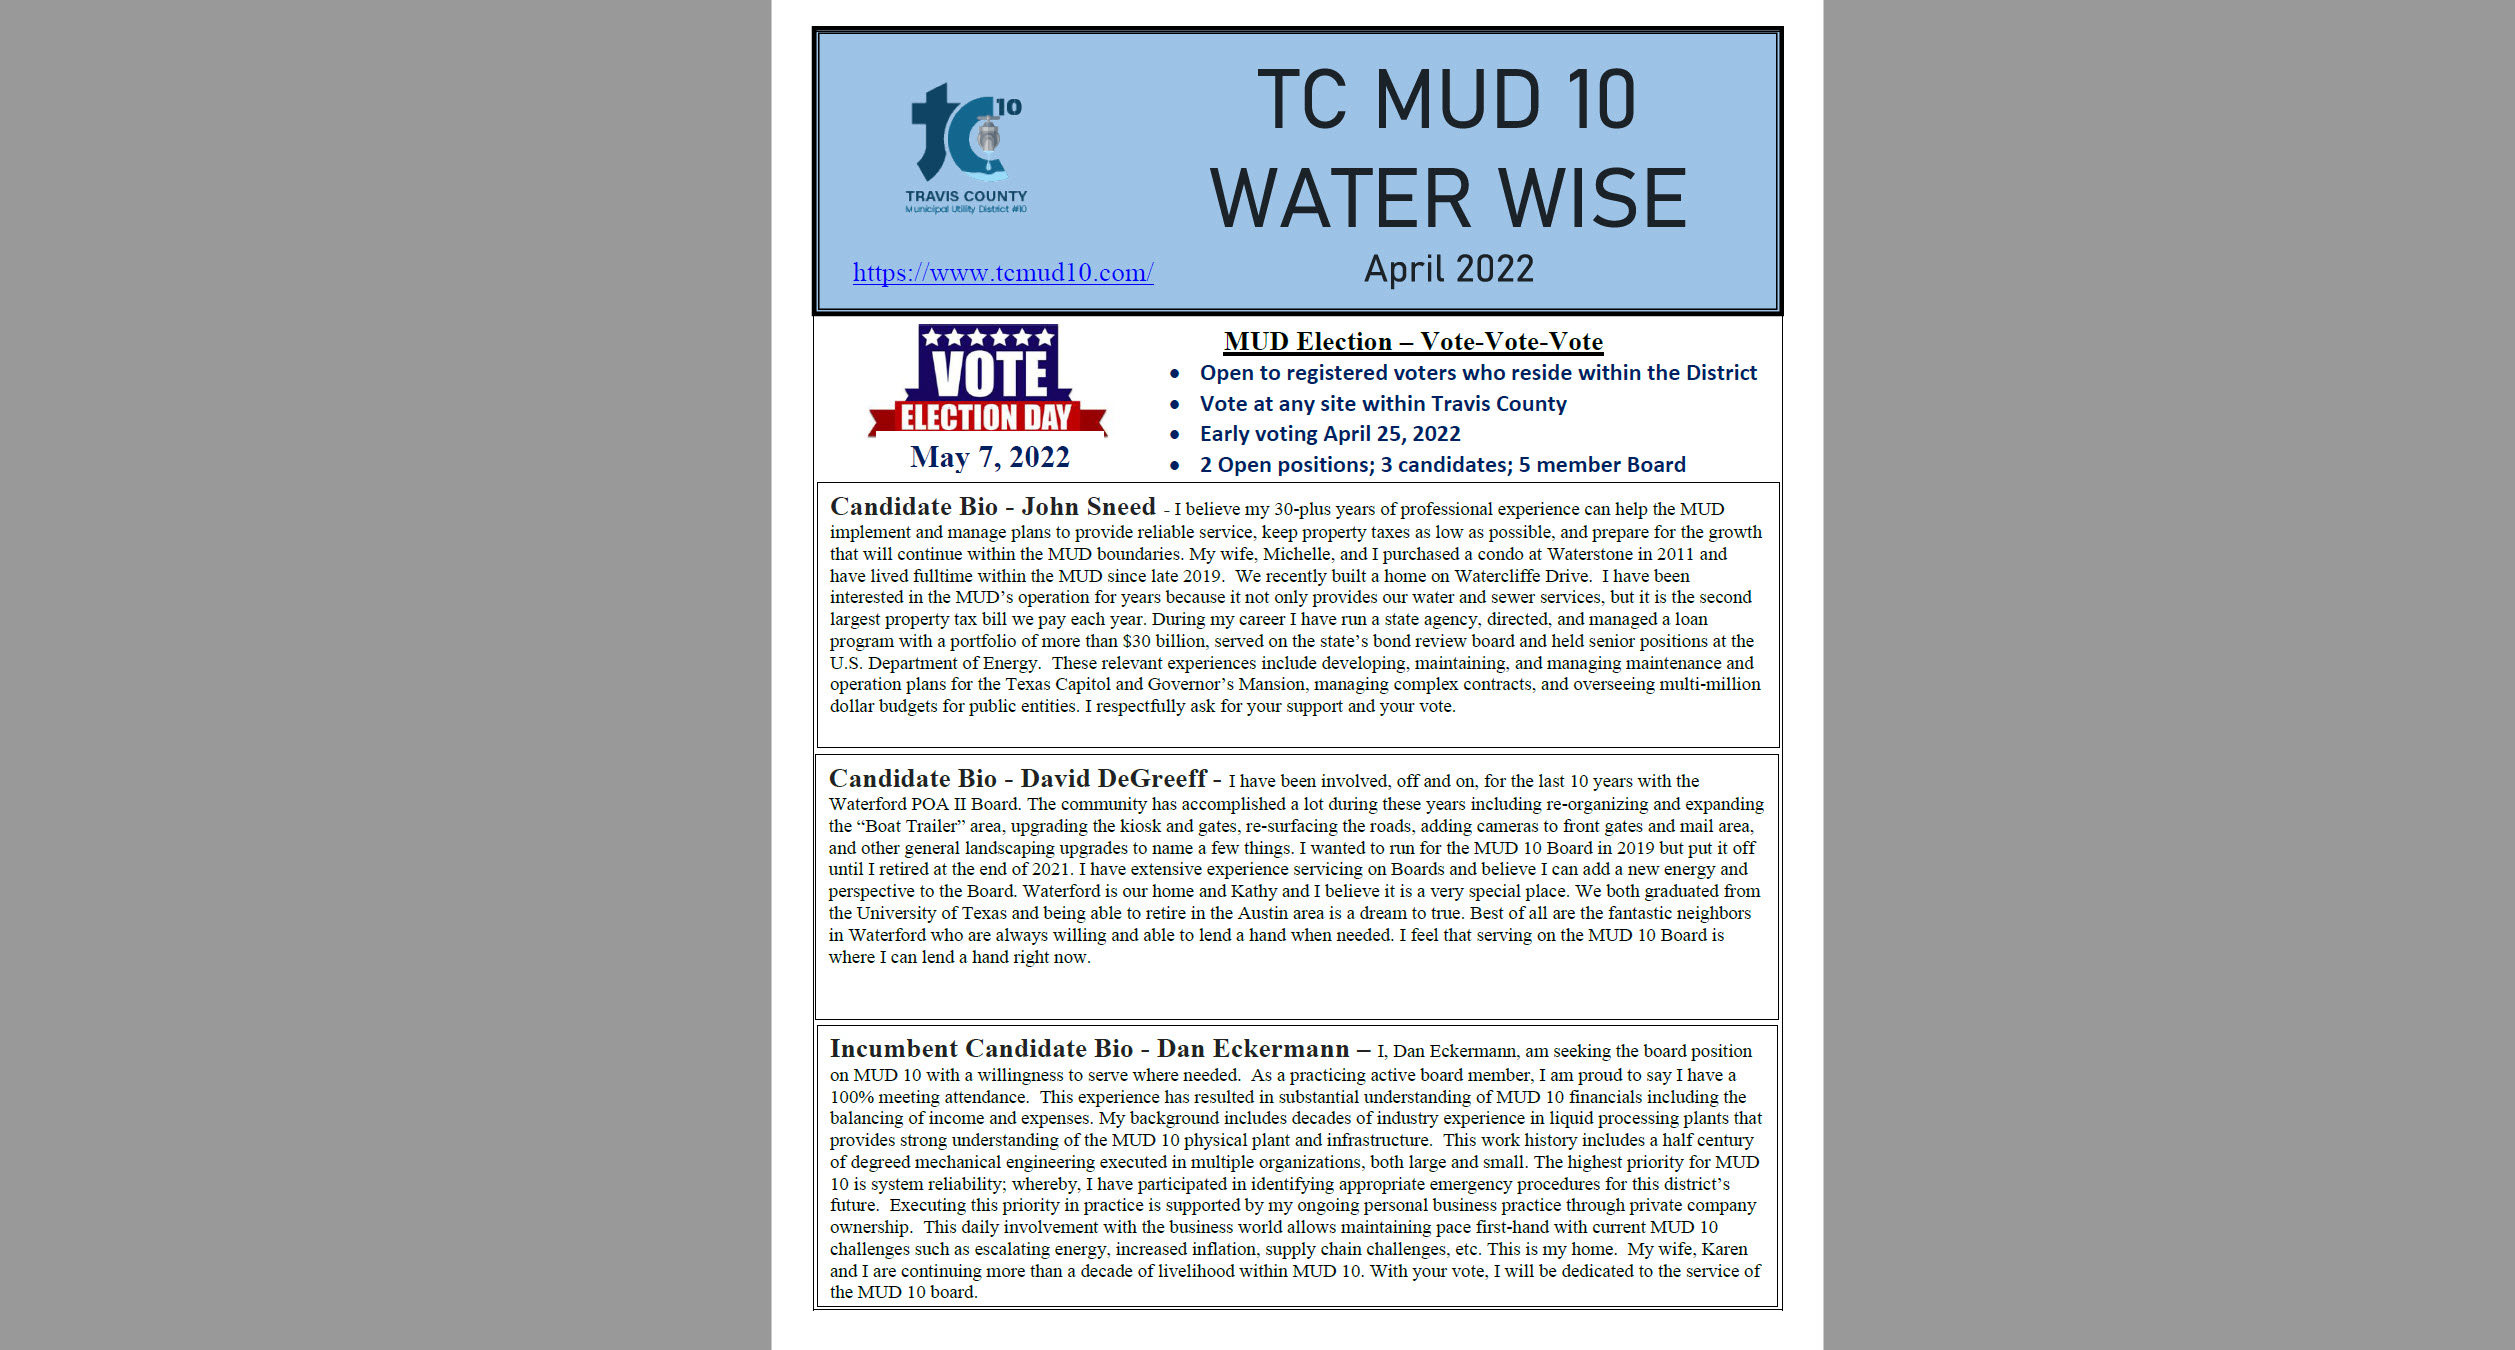 The April 2022 Edition of Travis County MUD 10 Water Wise Newsletter is now available.